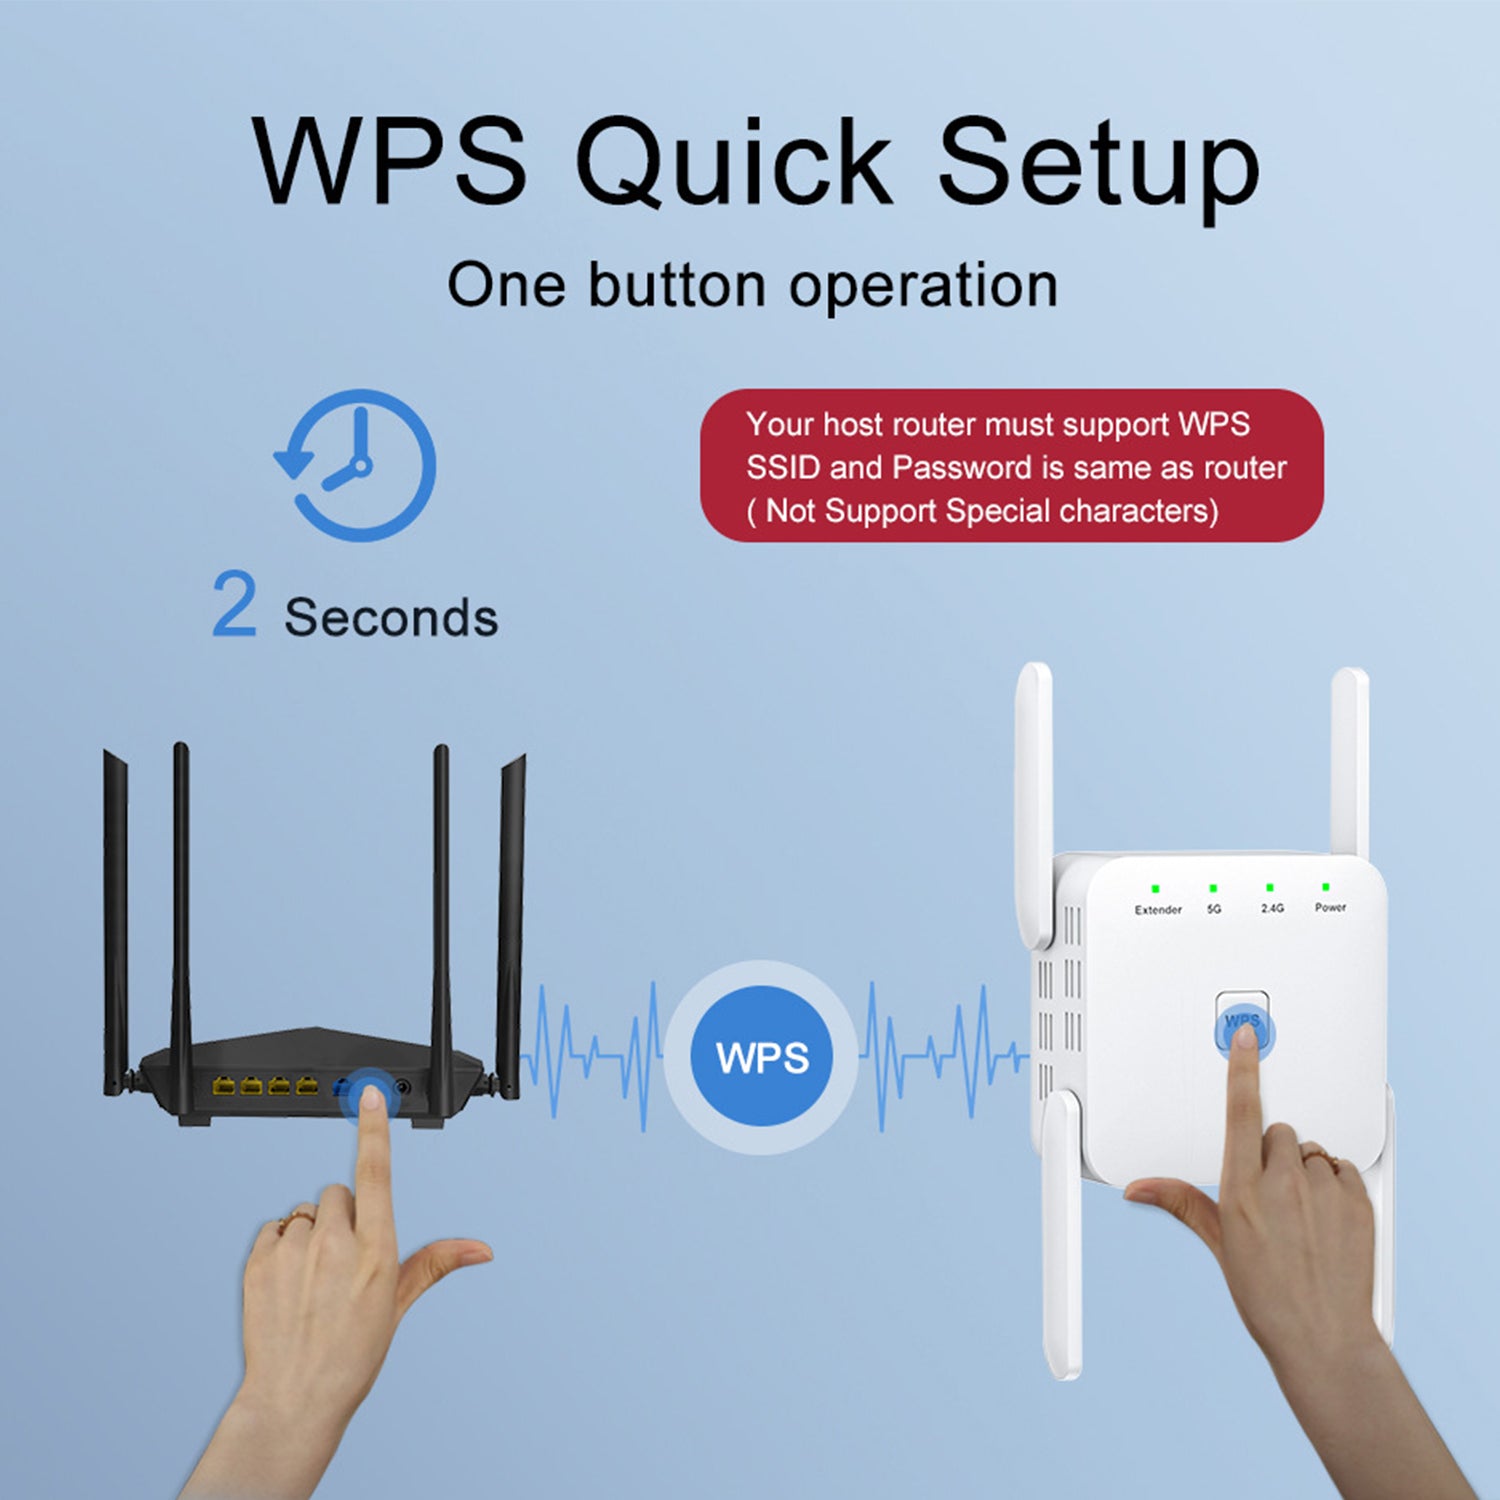 WiFi Extender- WiFi Range Extender Up to 1200Mbps, WiFi Signal Booster, 2.4  & 5GHz Dual Band WiFi Repeater with Access Ethernet Port, 360° Full  Coverage, Easy Set-Up. (1200Mbps) 